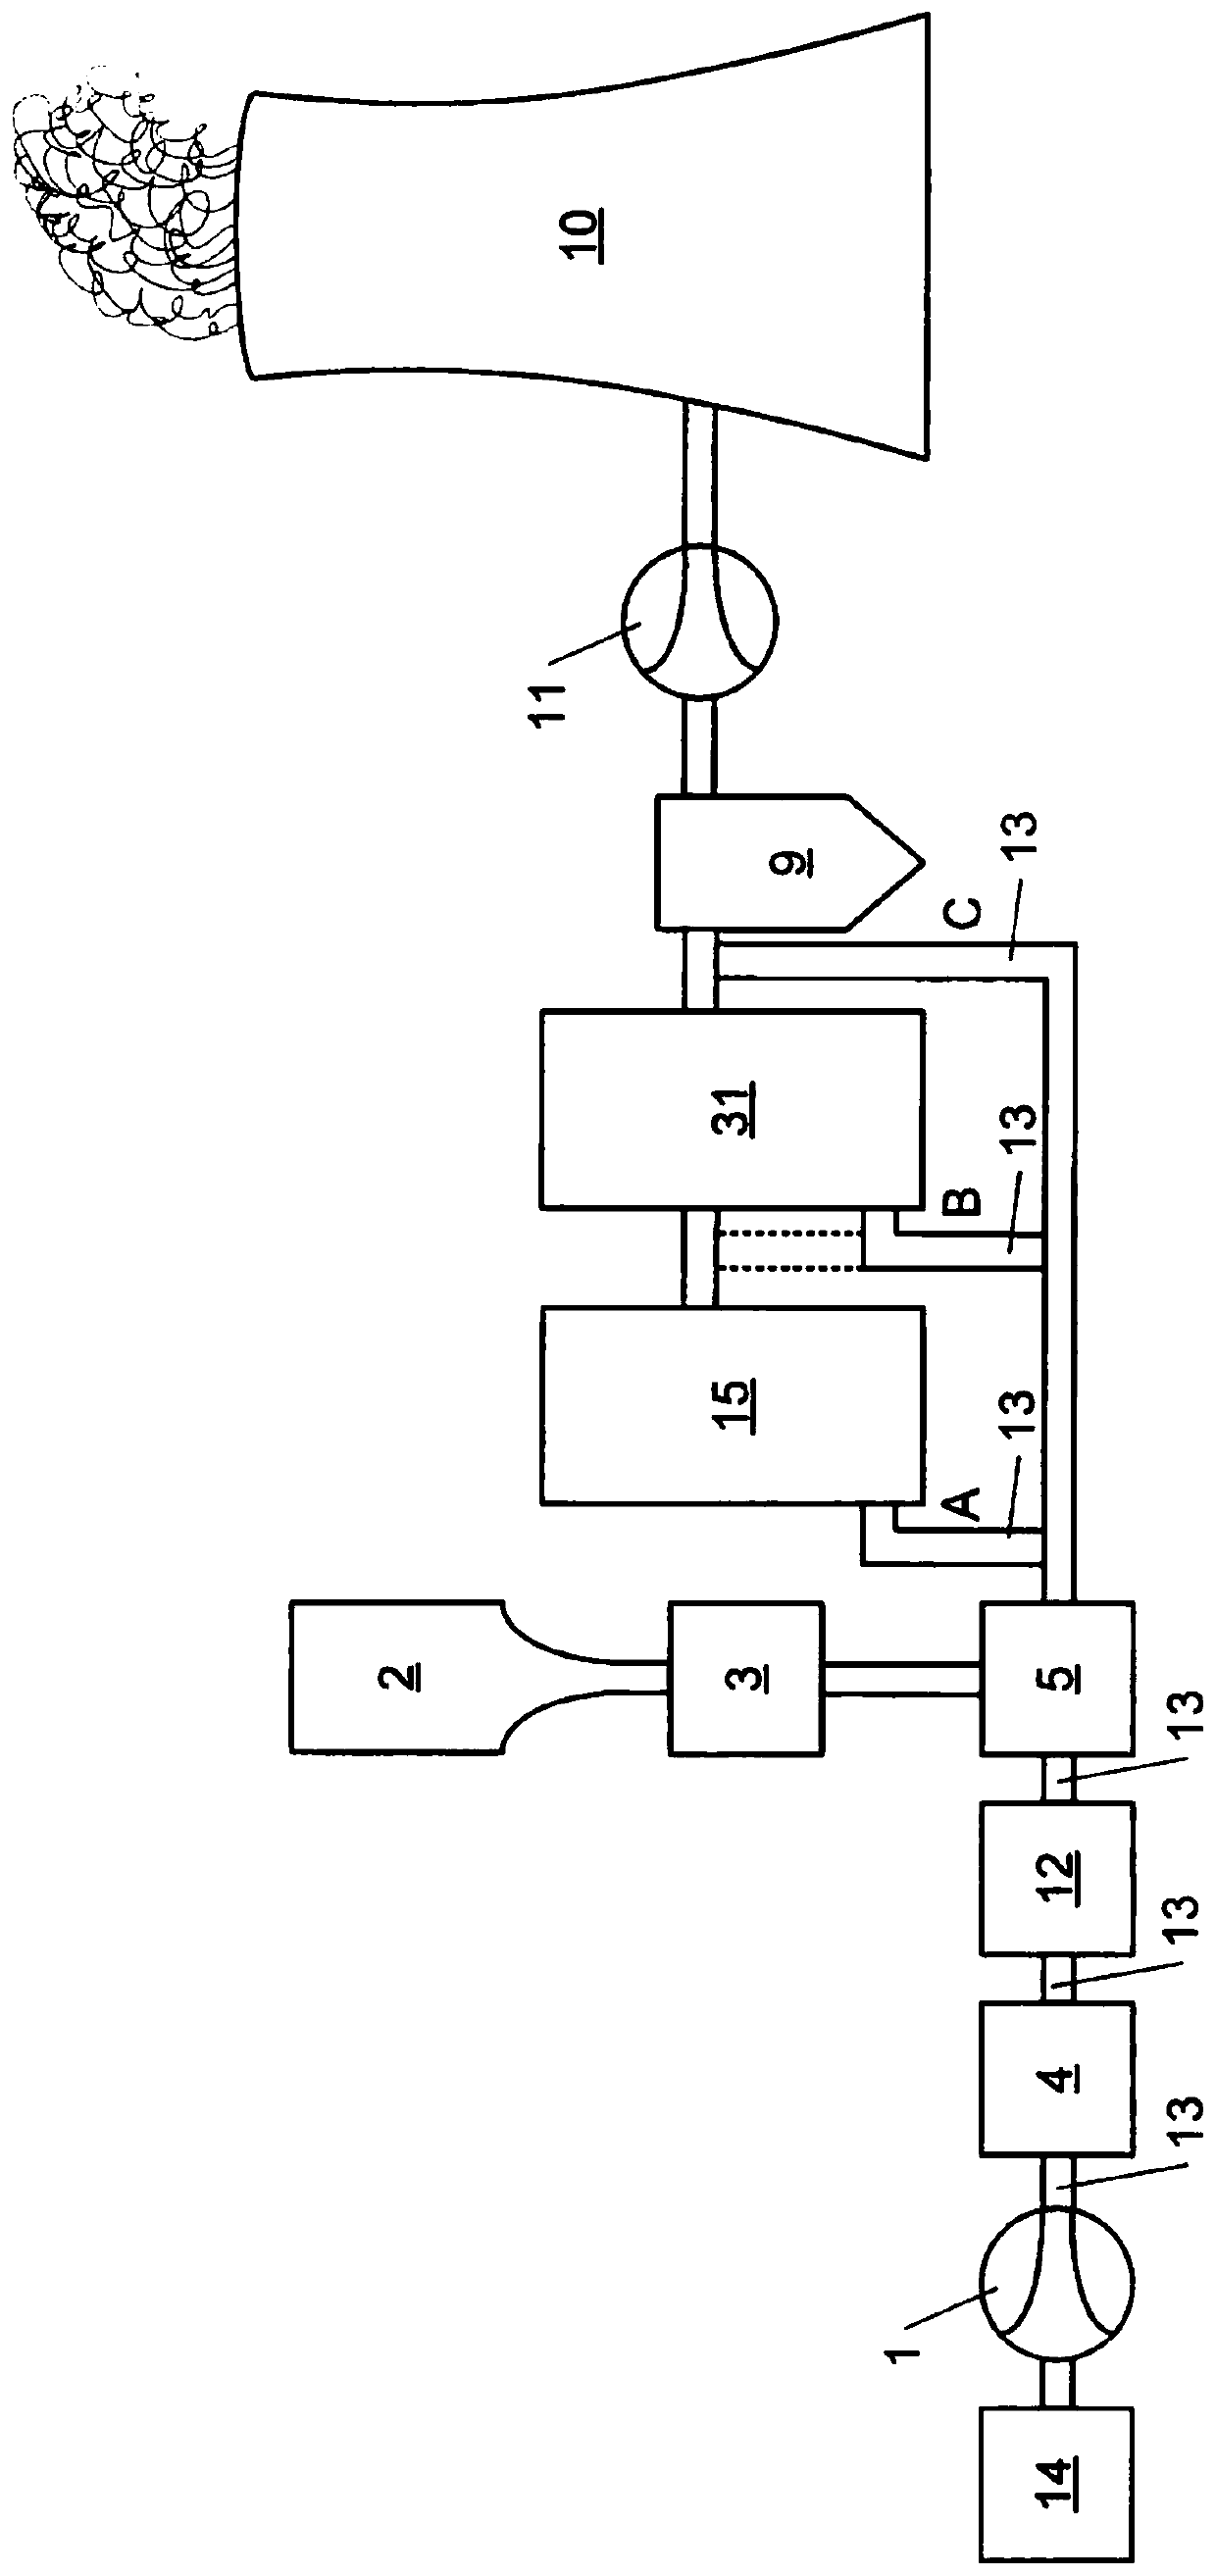 Process for pneumatically conveying a powdery material